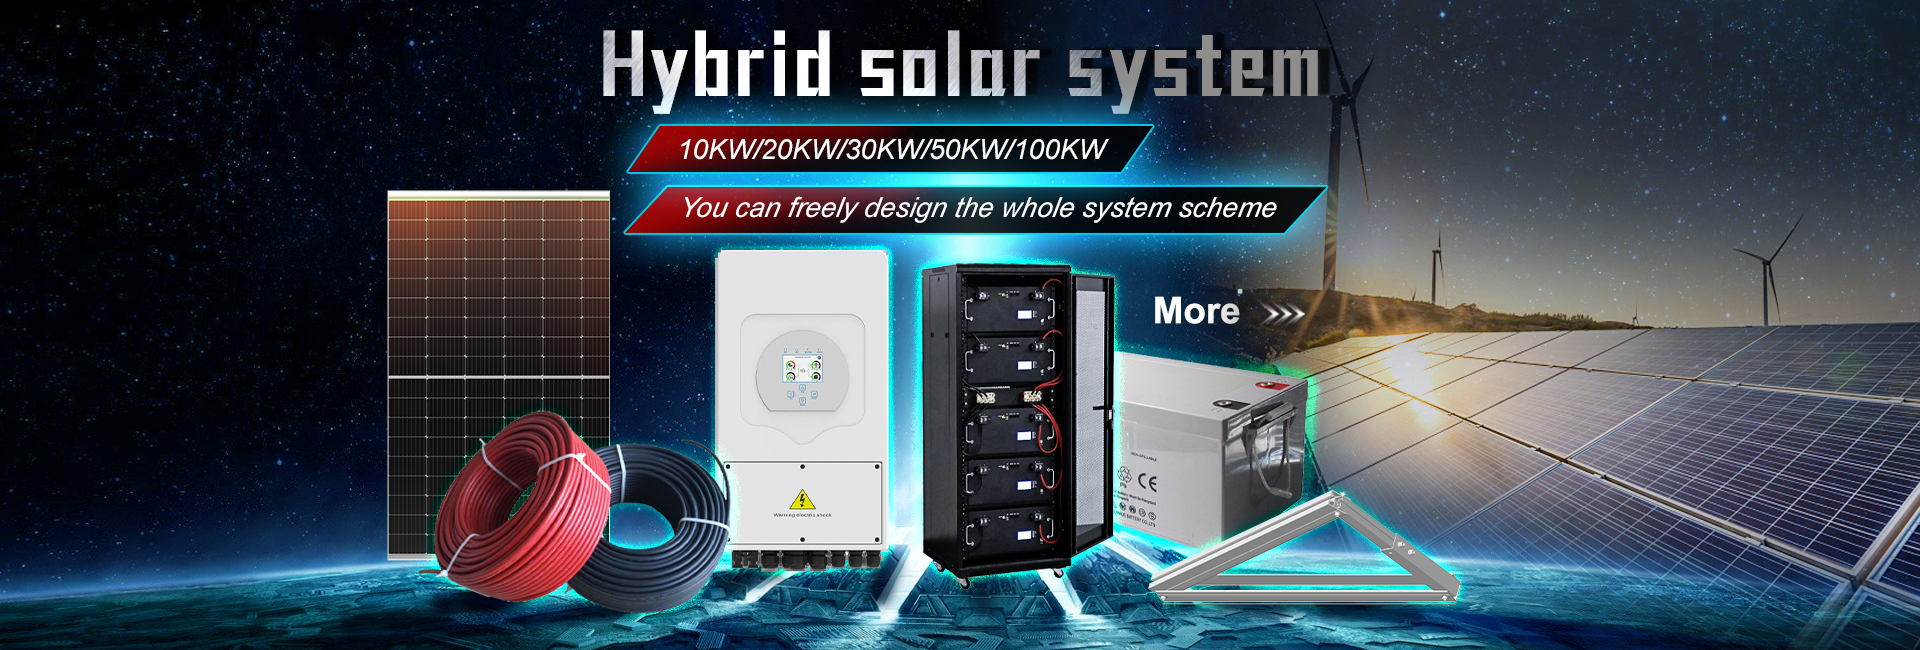 Off-grid solar system with storage battery 10KW/20K/30KW/50KW/100KW save your electricity cost